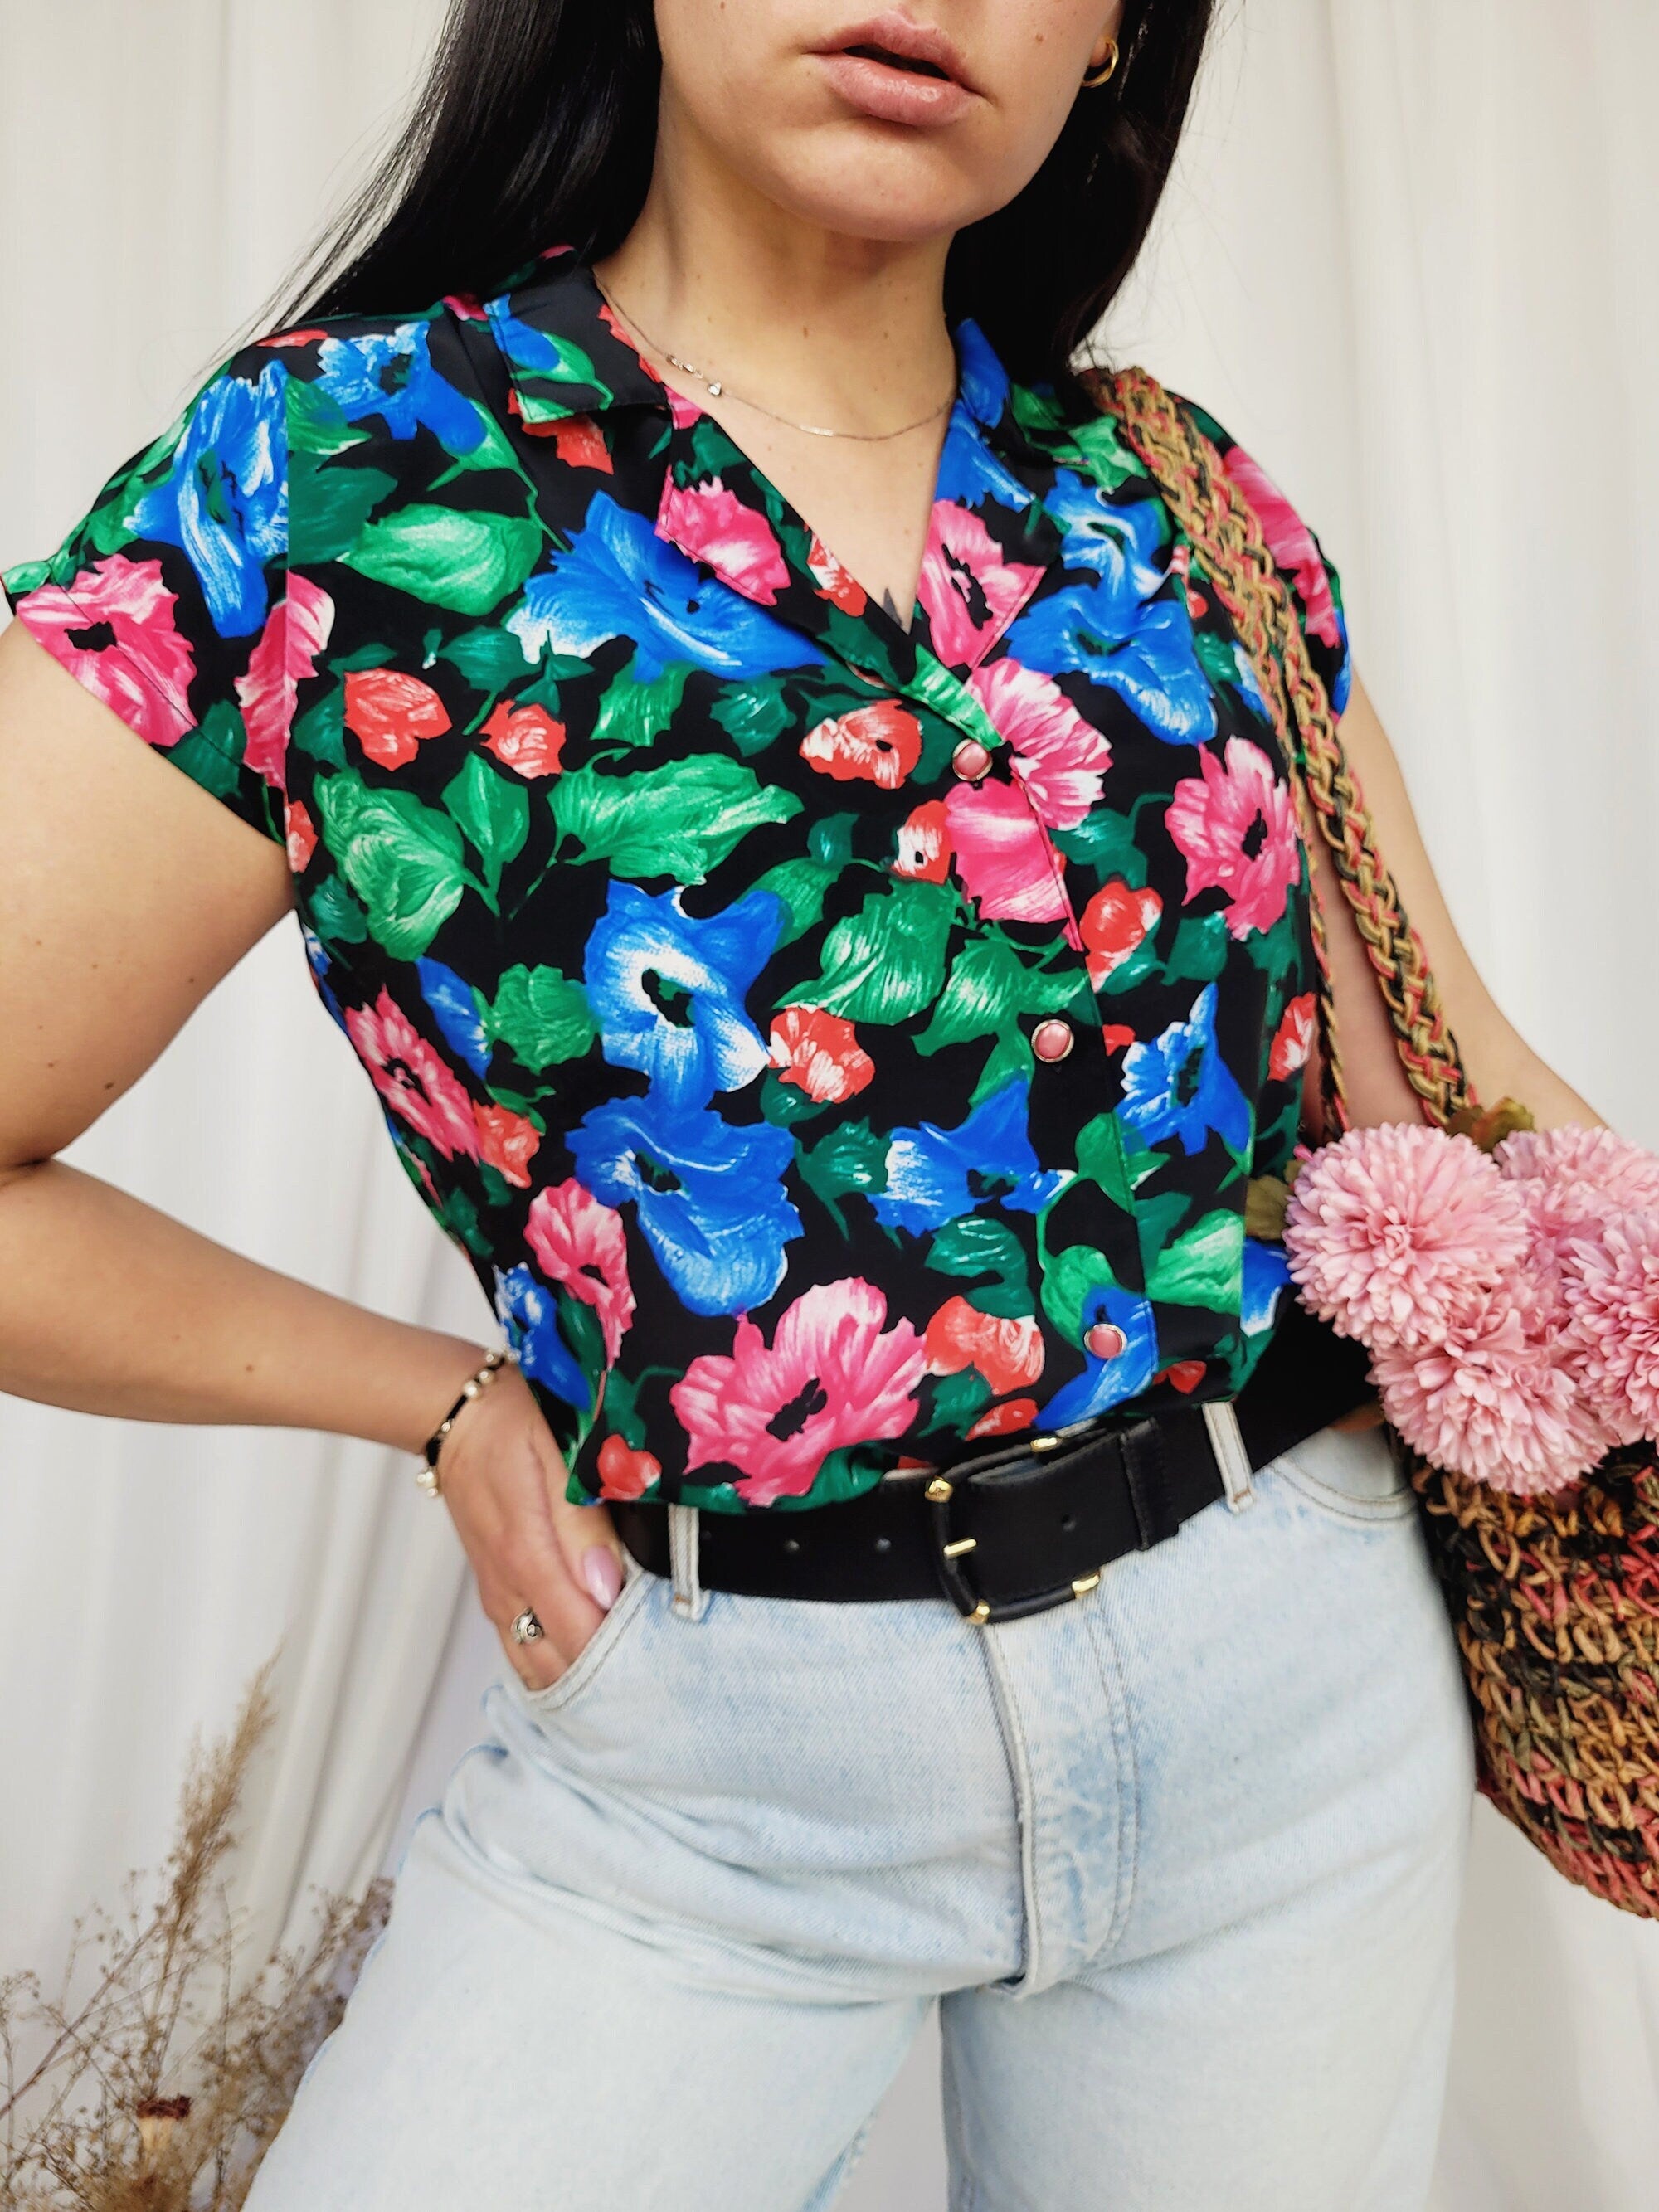 90s vintage colorful floral sleeveless buttons down blouse